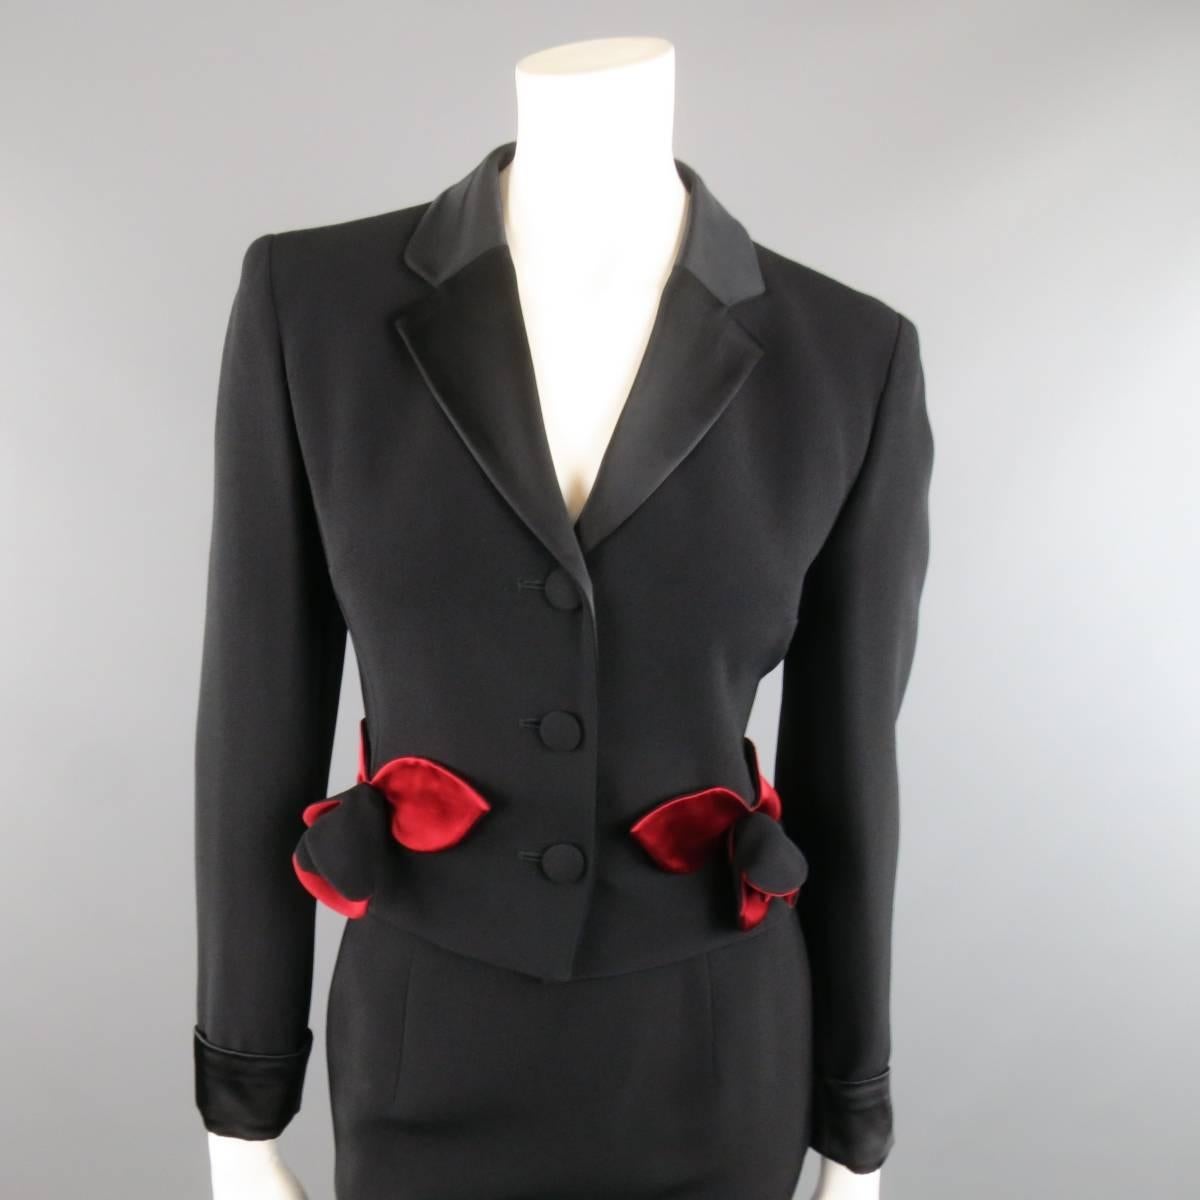 Vintage MOSCHINO Cheap & Chic suit comes in black crepe and includes a cropped jacket with satin lapel and cuffs, three button closure, and red satin rose appliques at waist with matching skirt. Made in Italy.
 
Good Pre-Owned Condition.
Marked: 8
